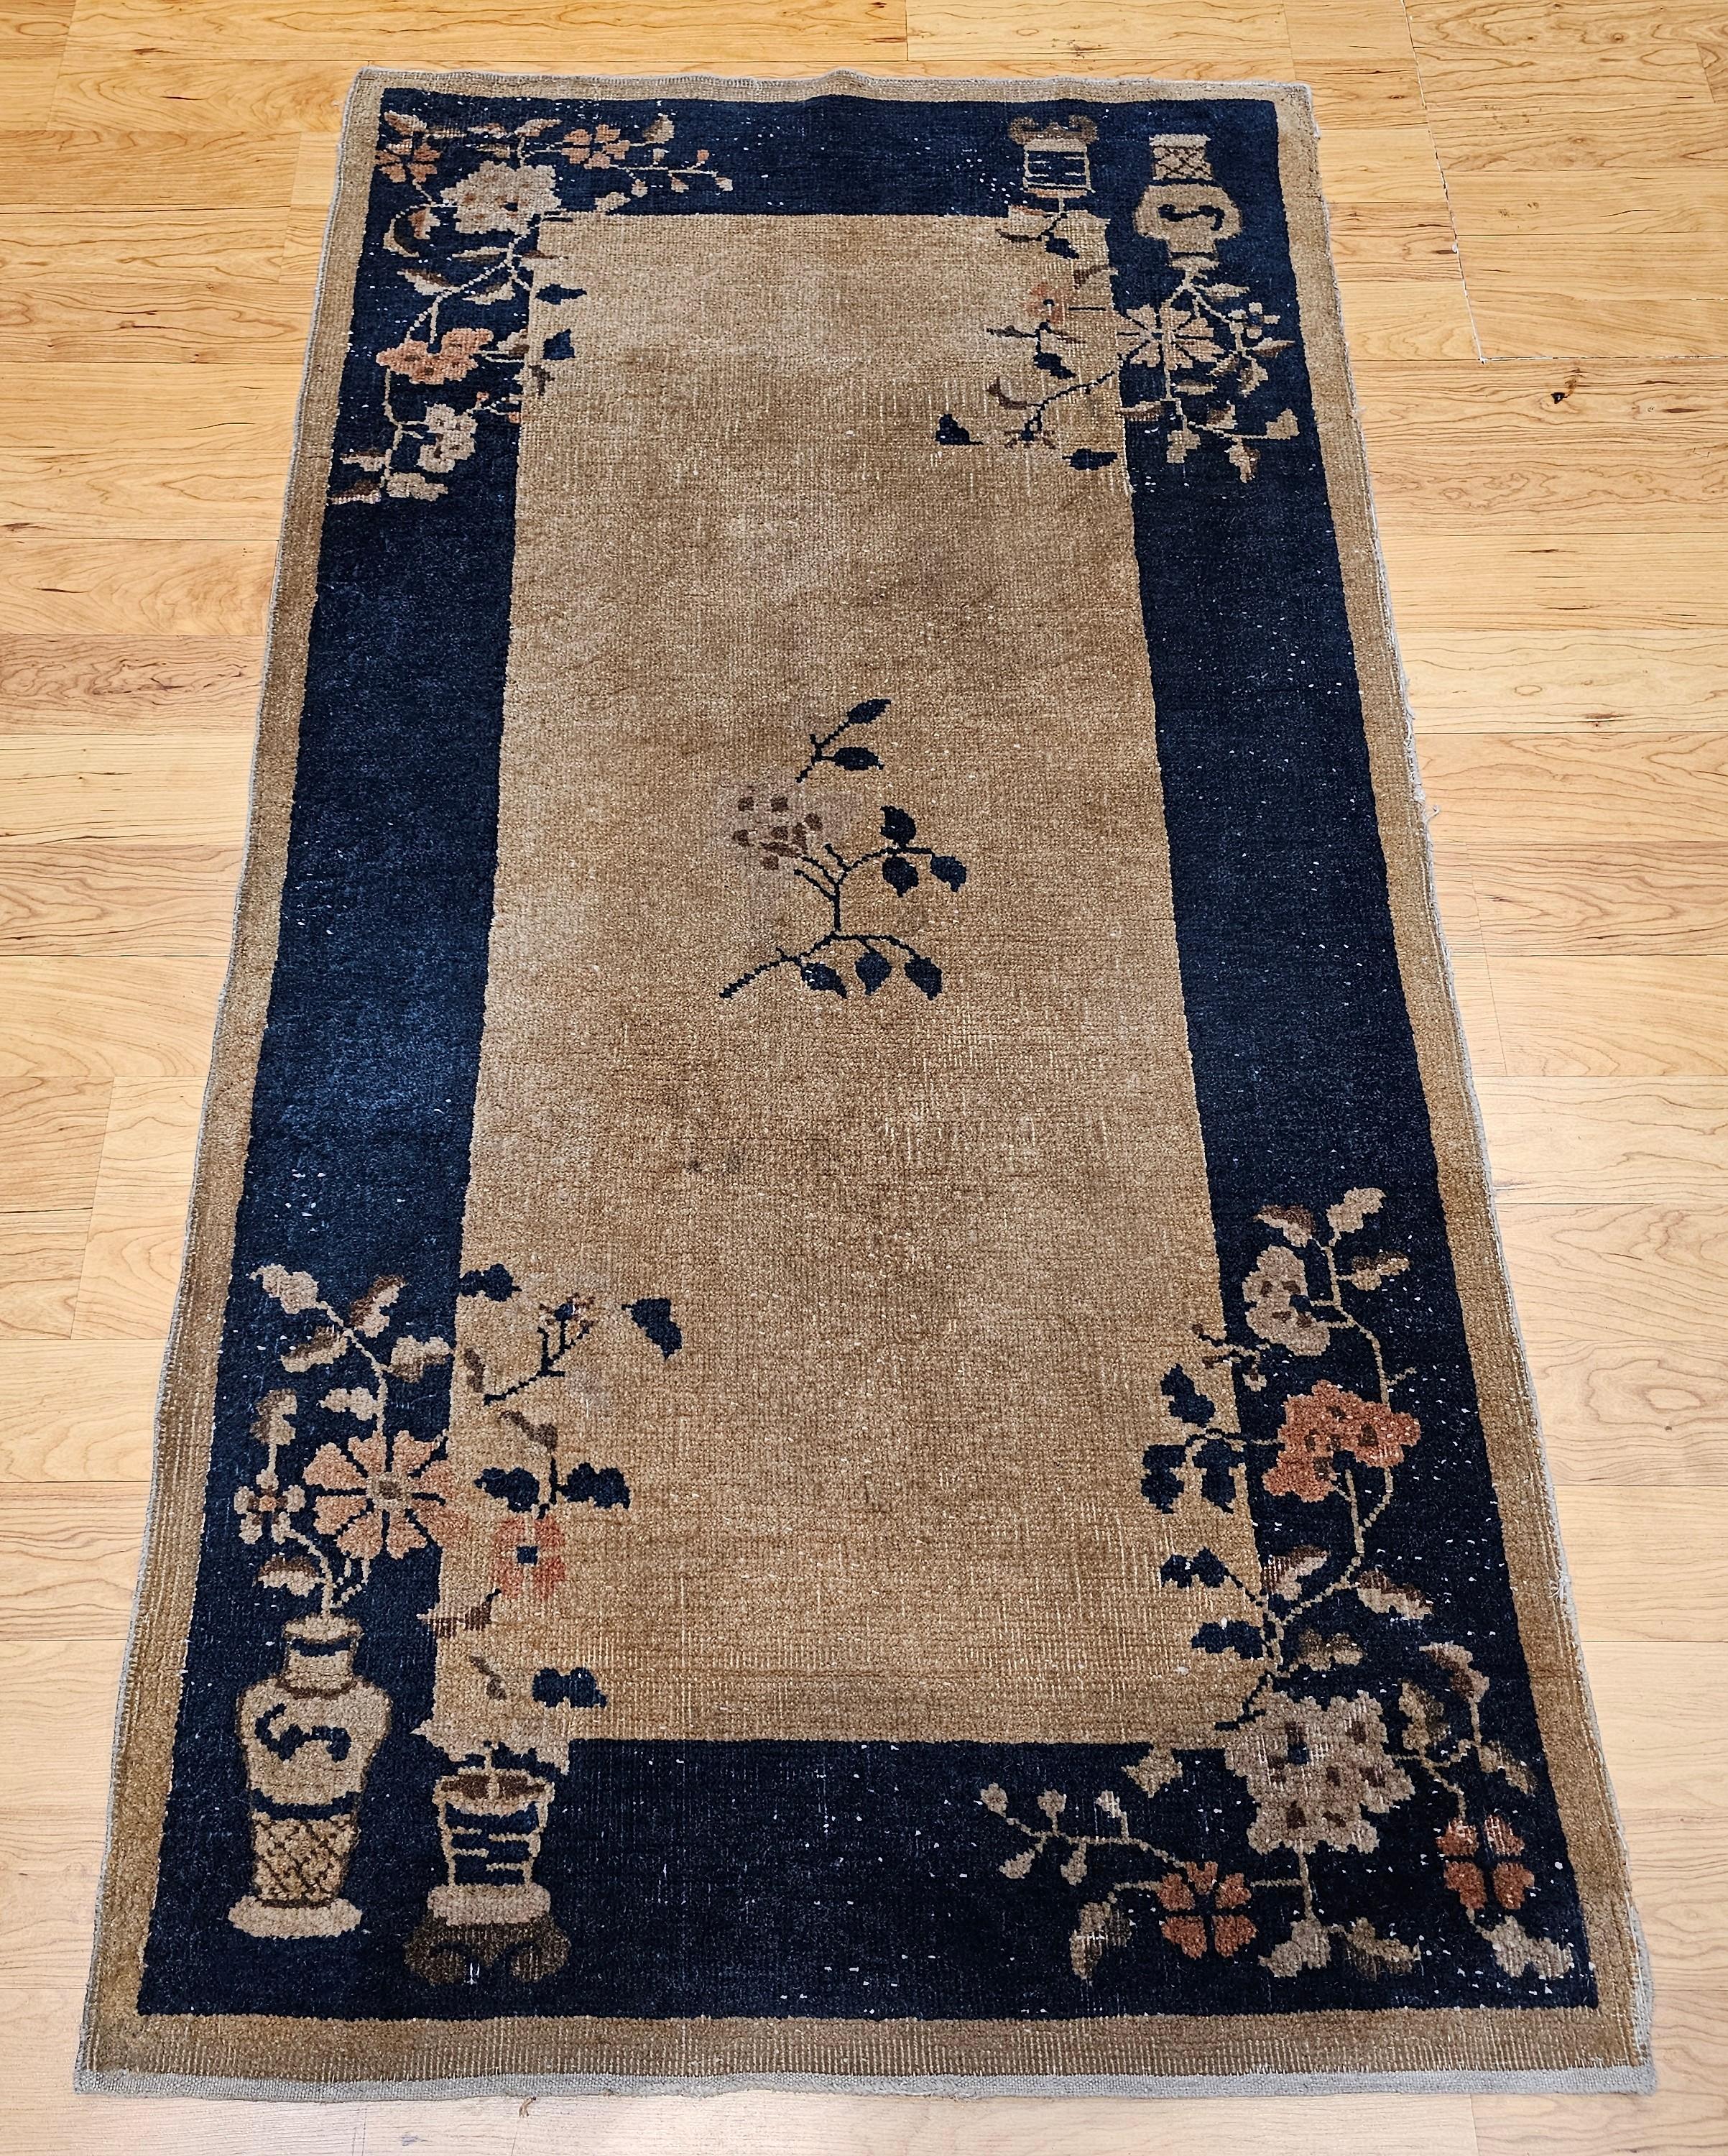 Beautiful vintage Art Deco Chinese area rug with vase pattern design in a tan color background and a navy blue border.  There is a small flower design in the center of the rug with the design of flower vases in each corner.  The Chinese Art Deco